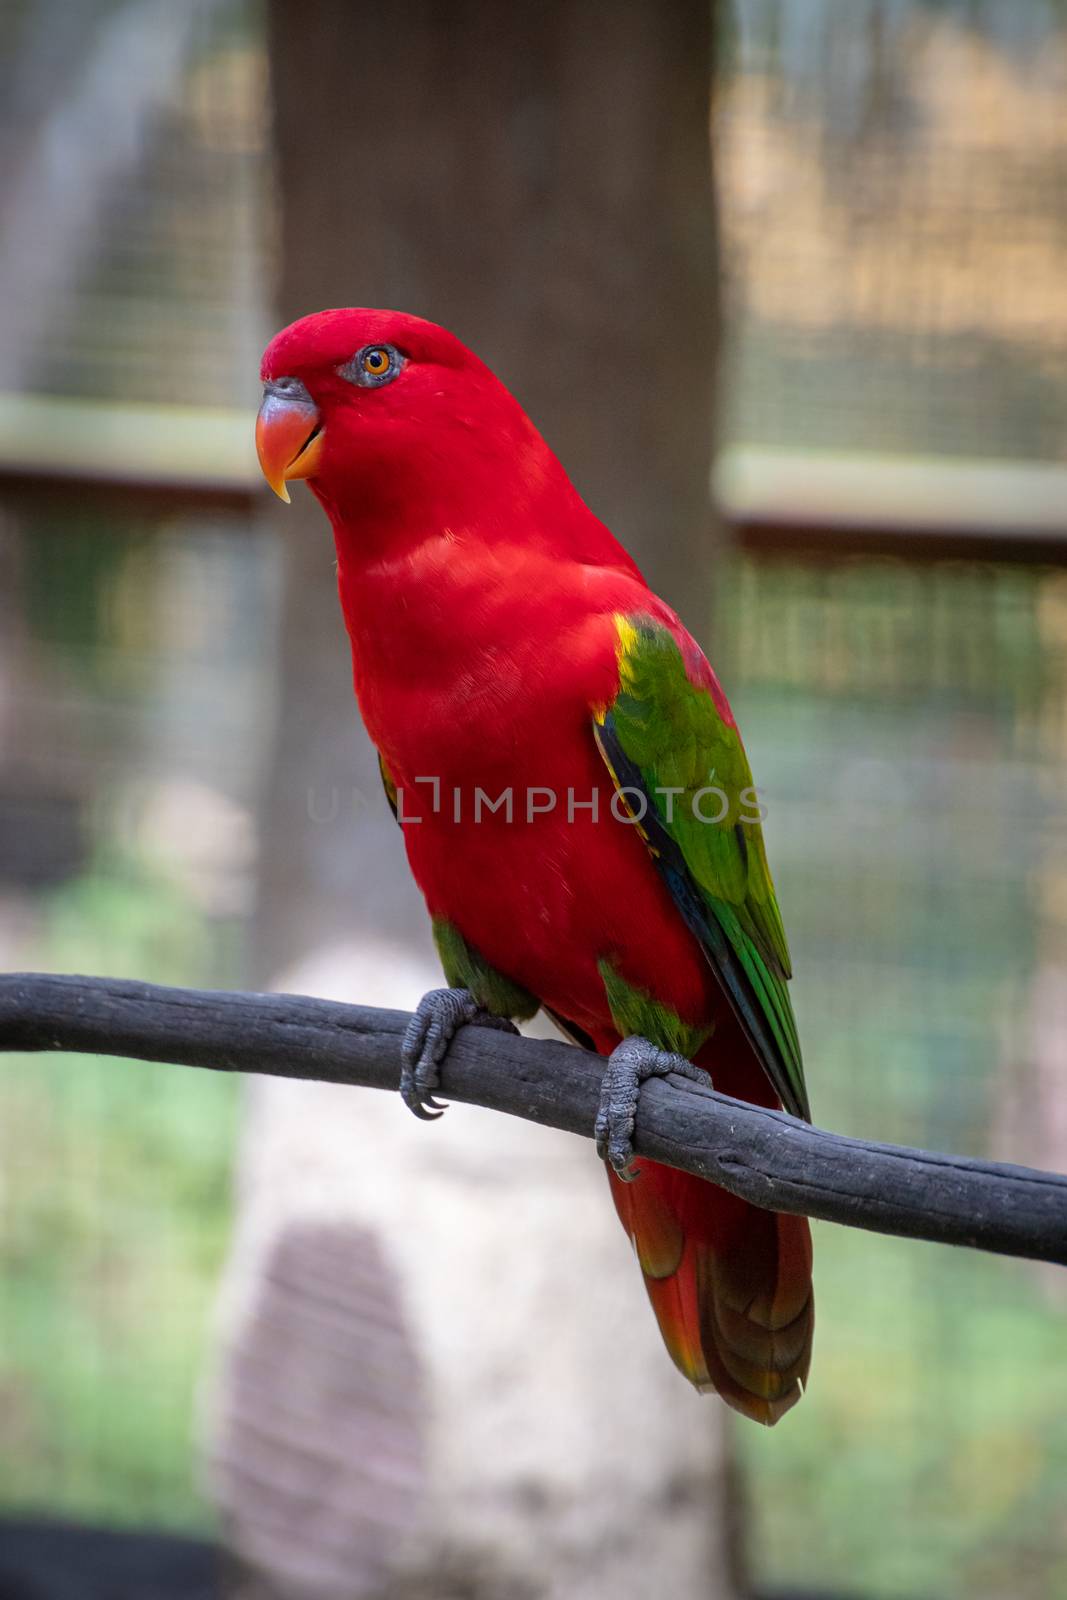 Red parrot popinjay with green yellow and blue wing feathers in Malaysia by MXW_Stock